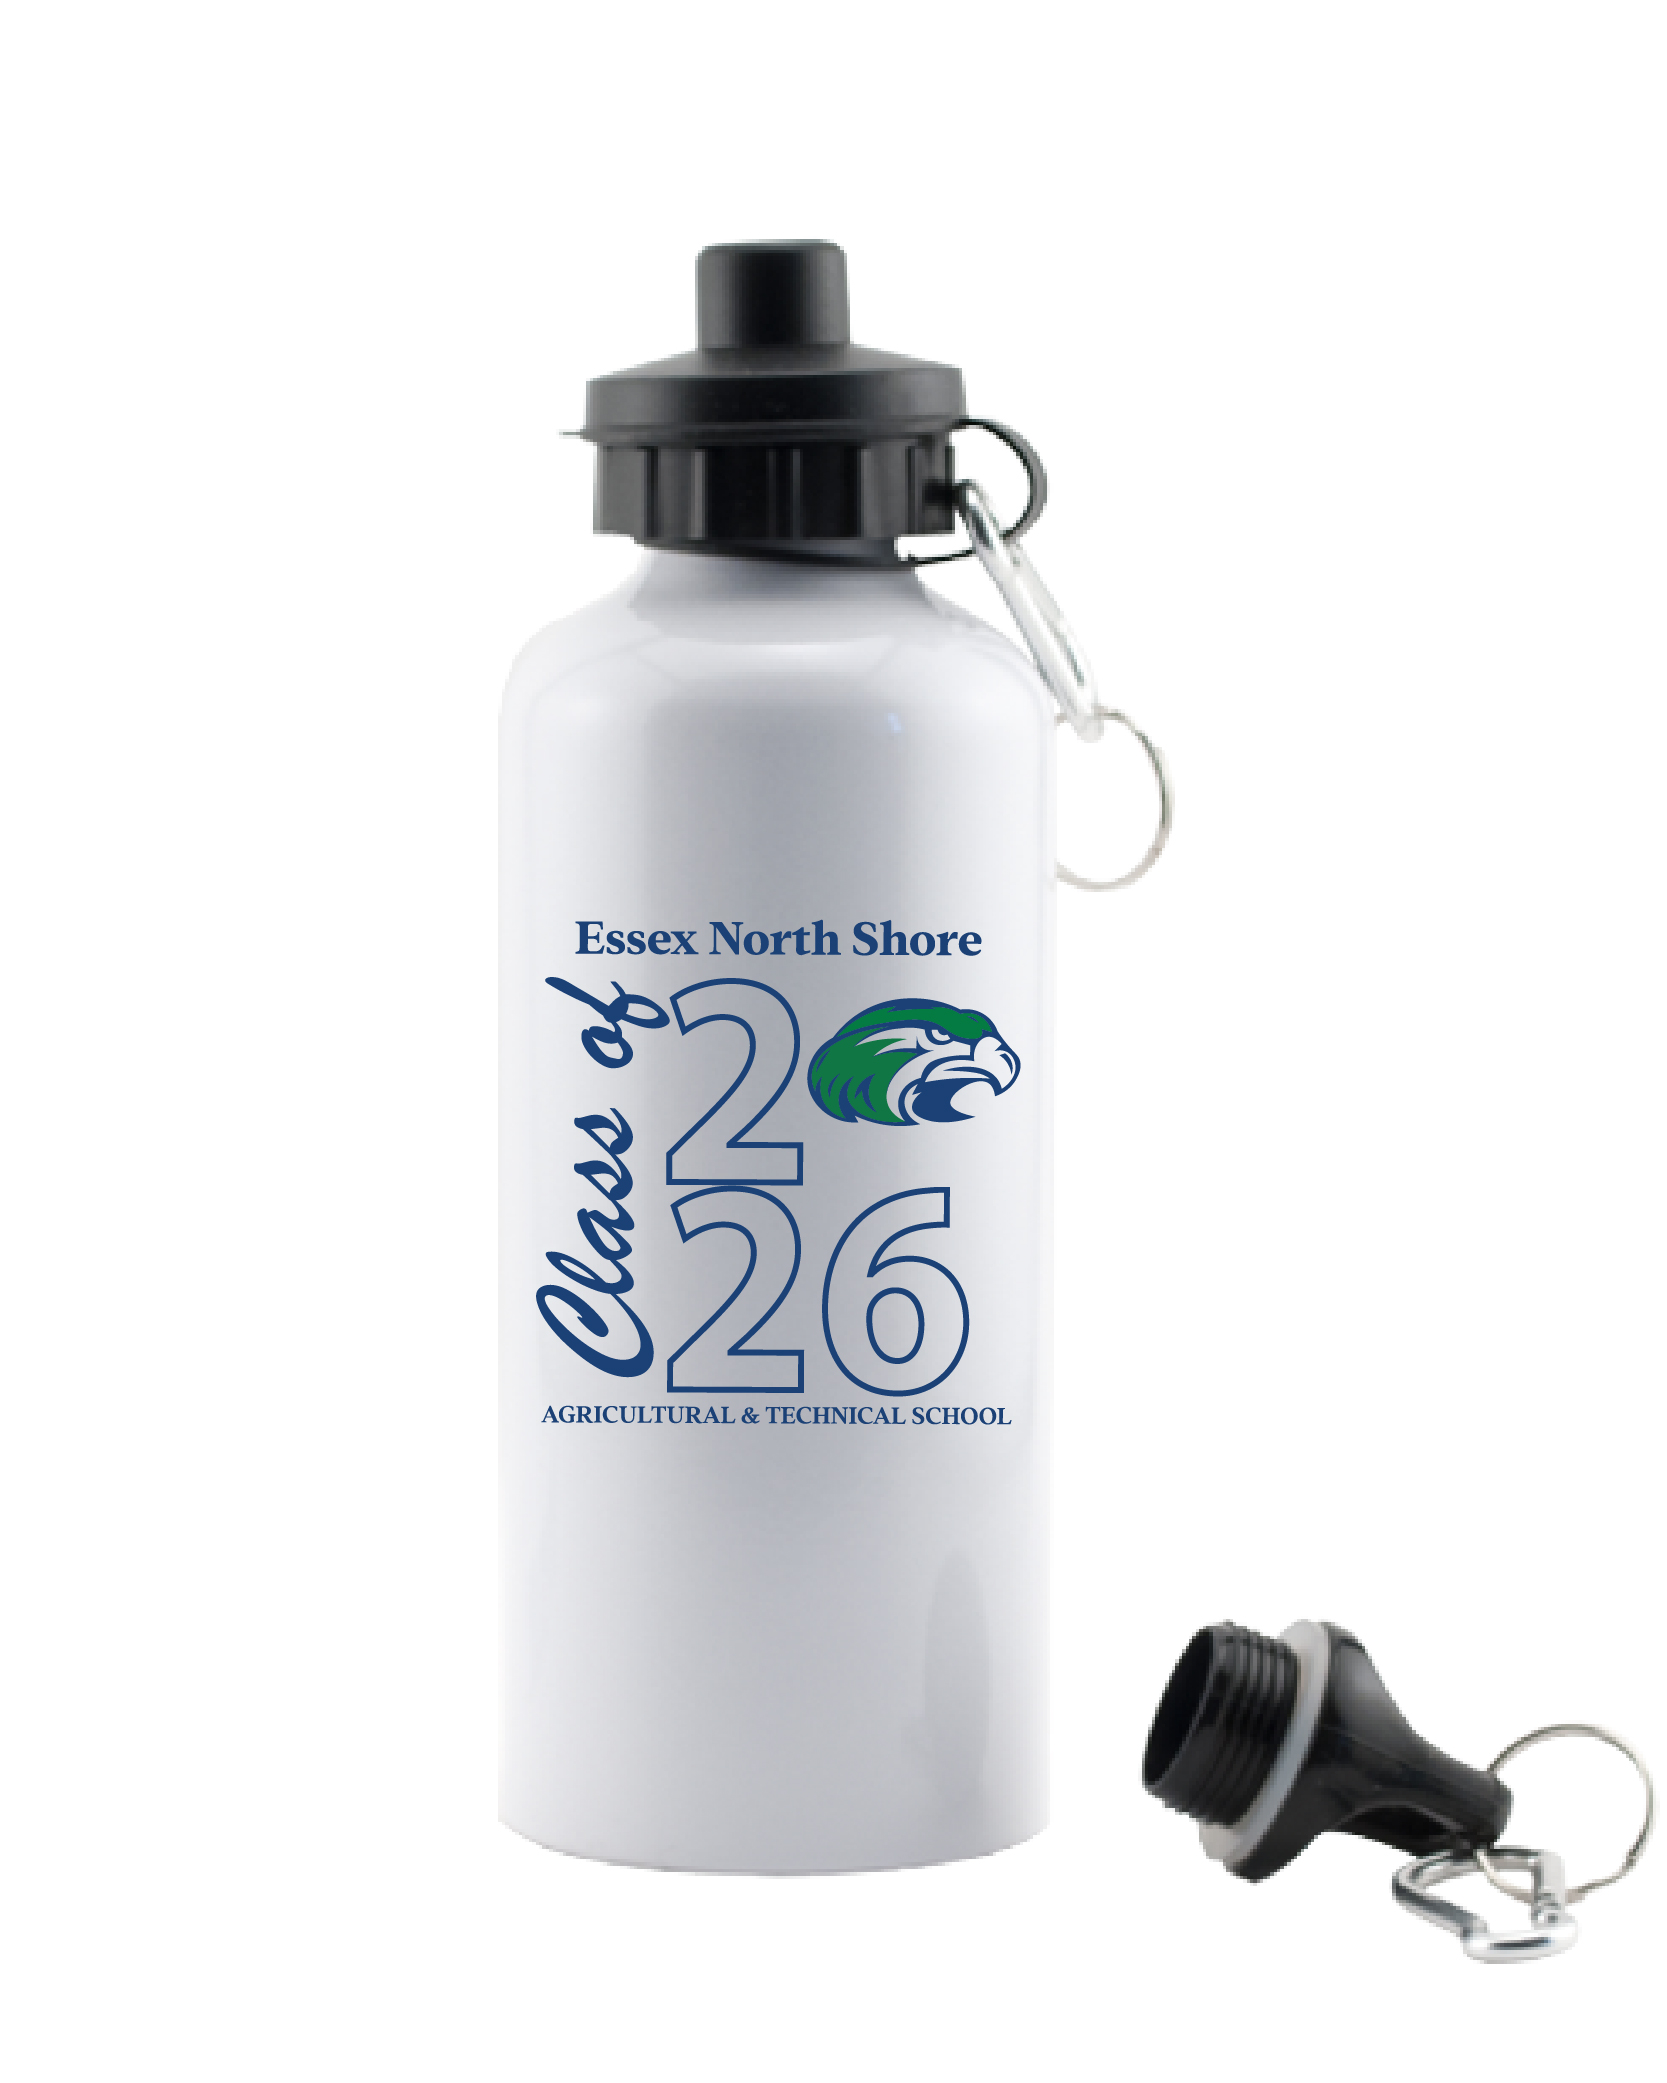 Essex North Shore PTO CLASS OF 2026 ALUMINUM WATER BOTTLE - 600ML - W/TOP AND CARABINER